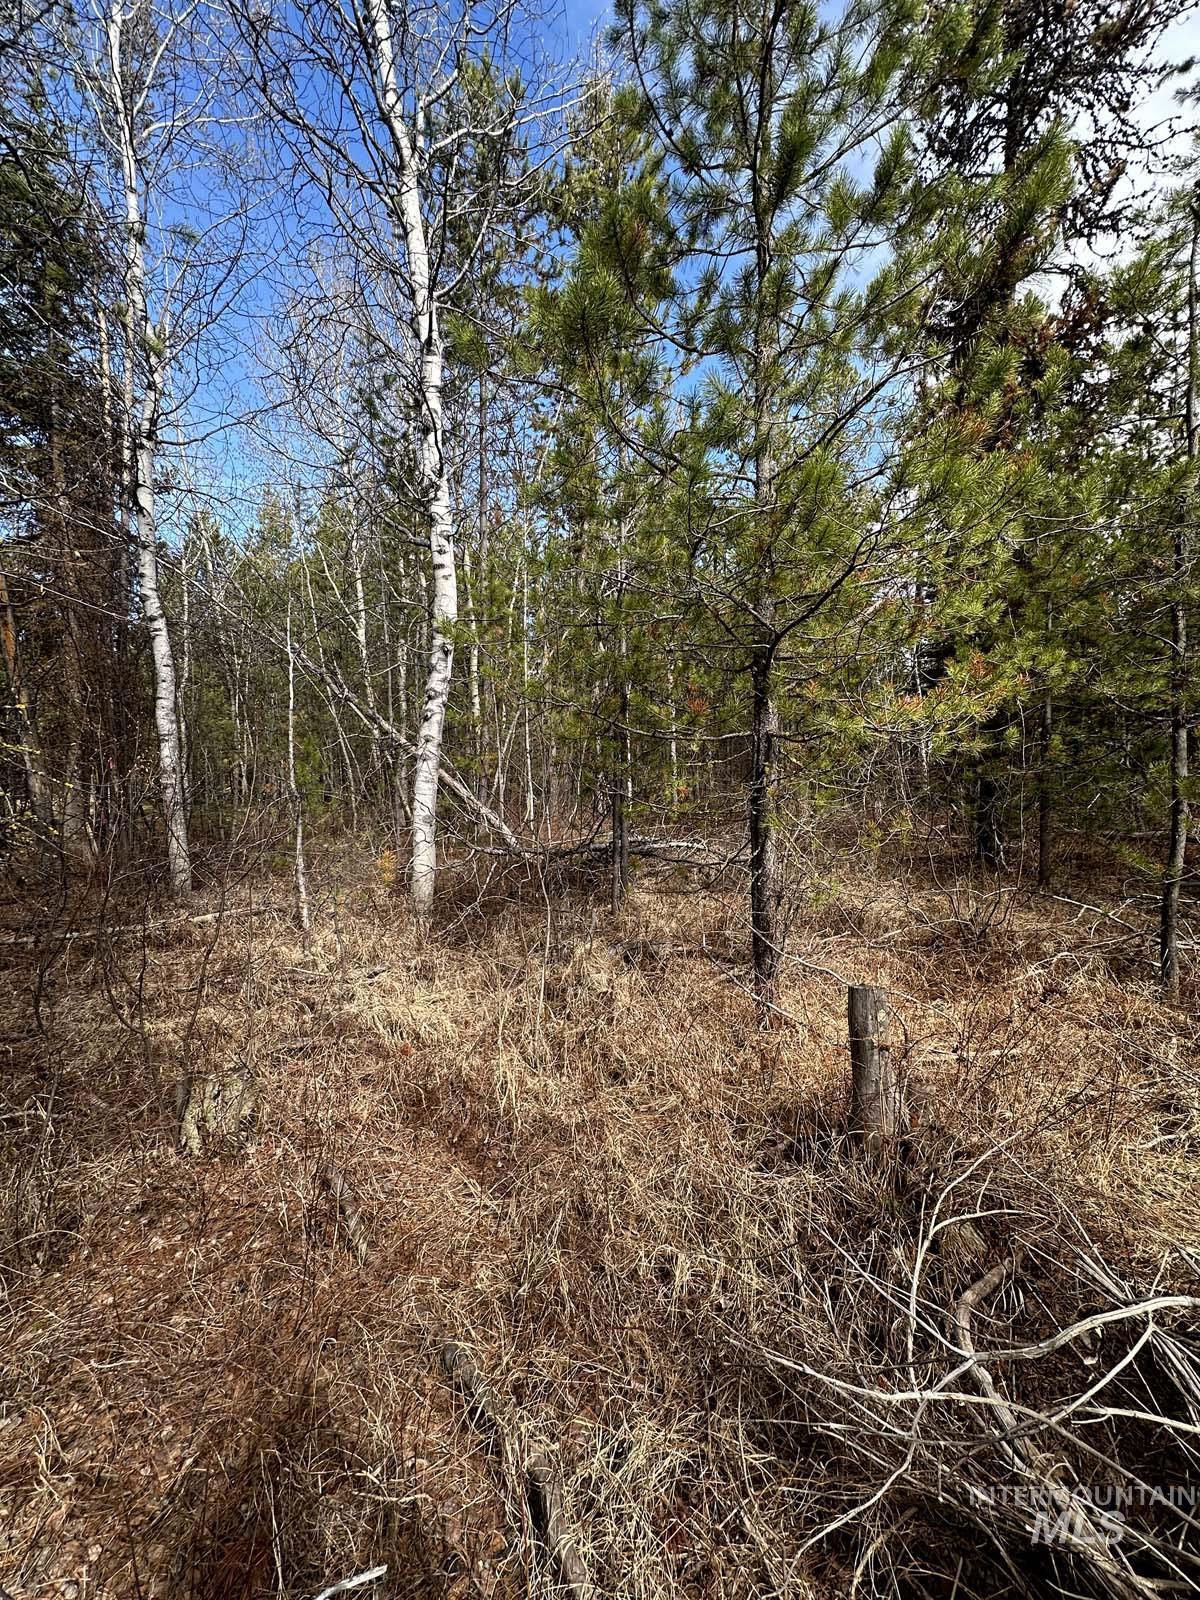 200 Angus Lane, Donnelly, Idaho 83615, Land For Sale, Price $190,000,MLS 98908229